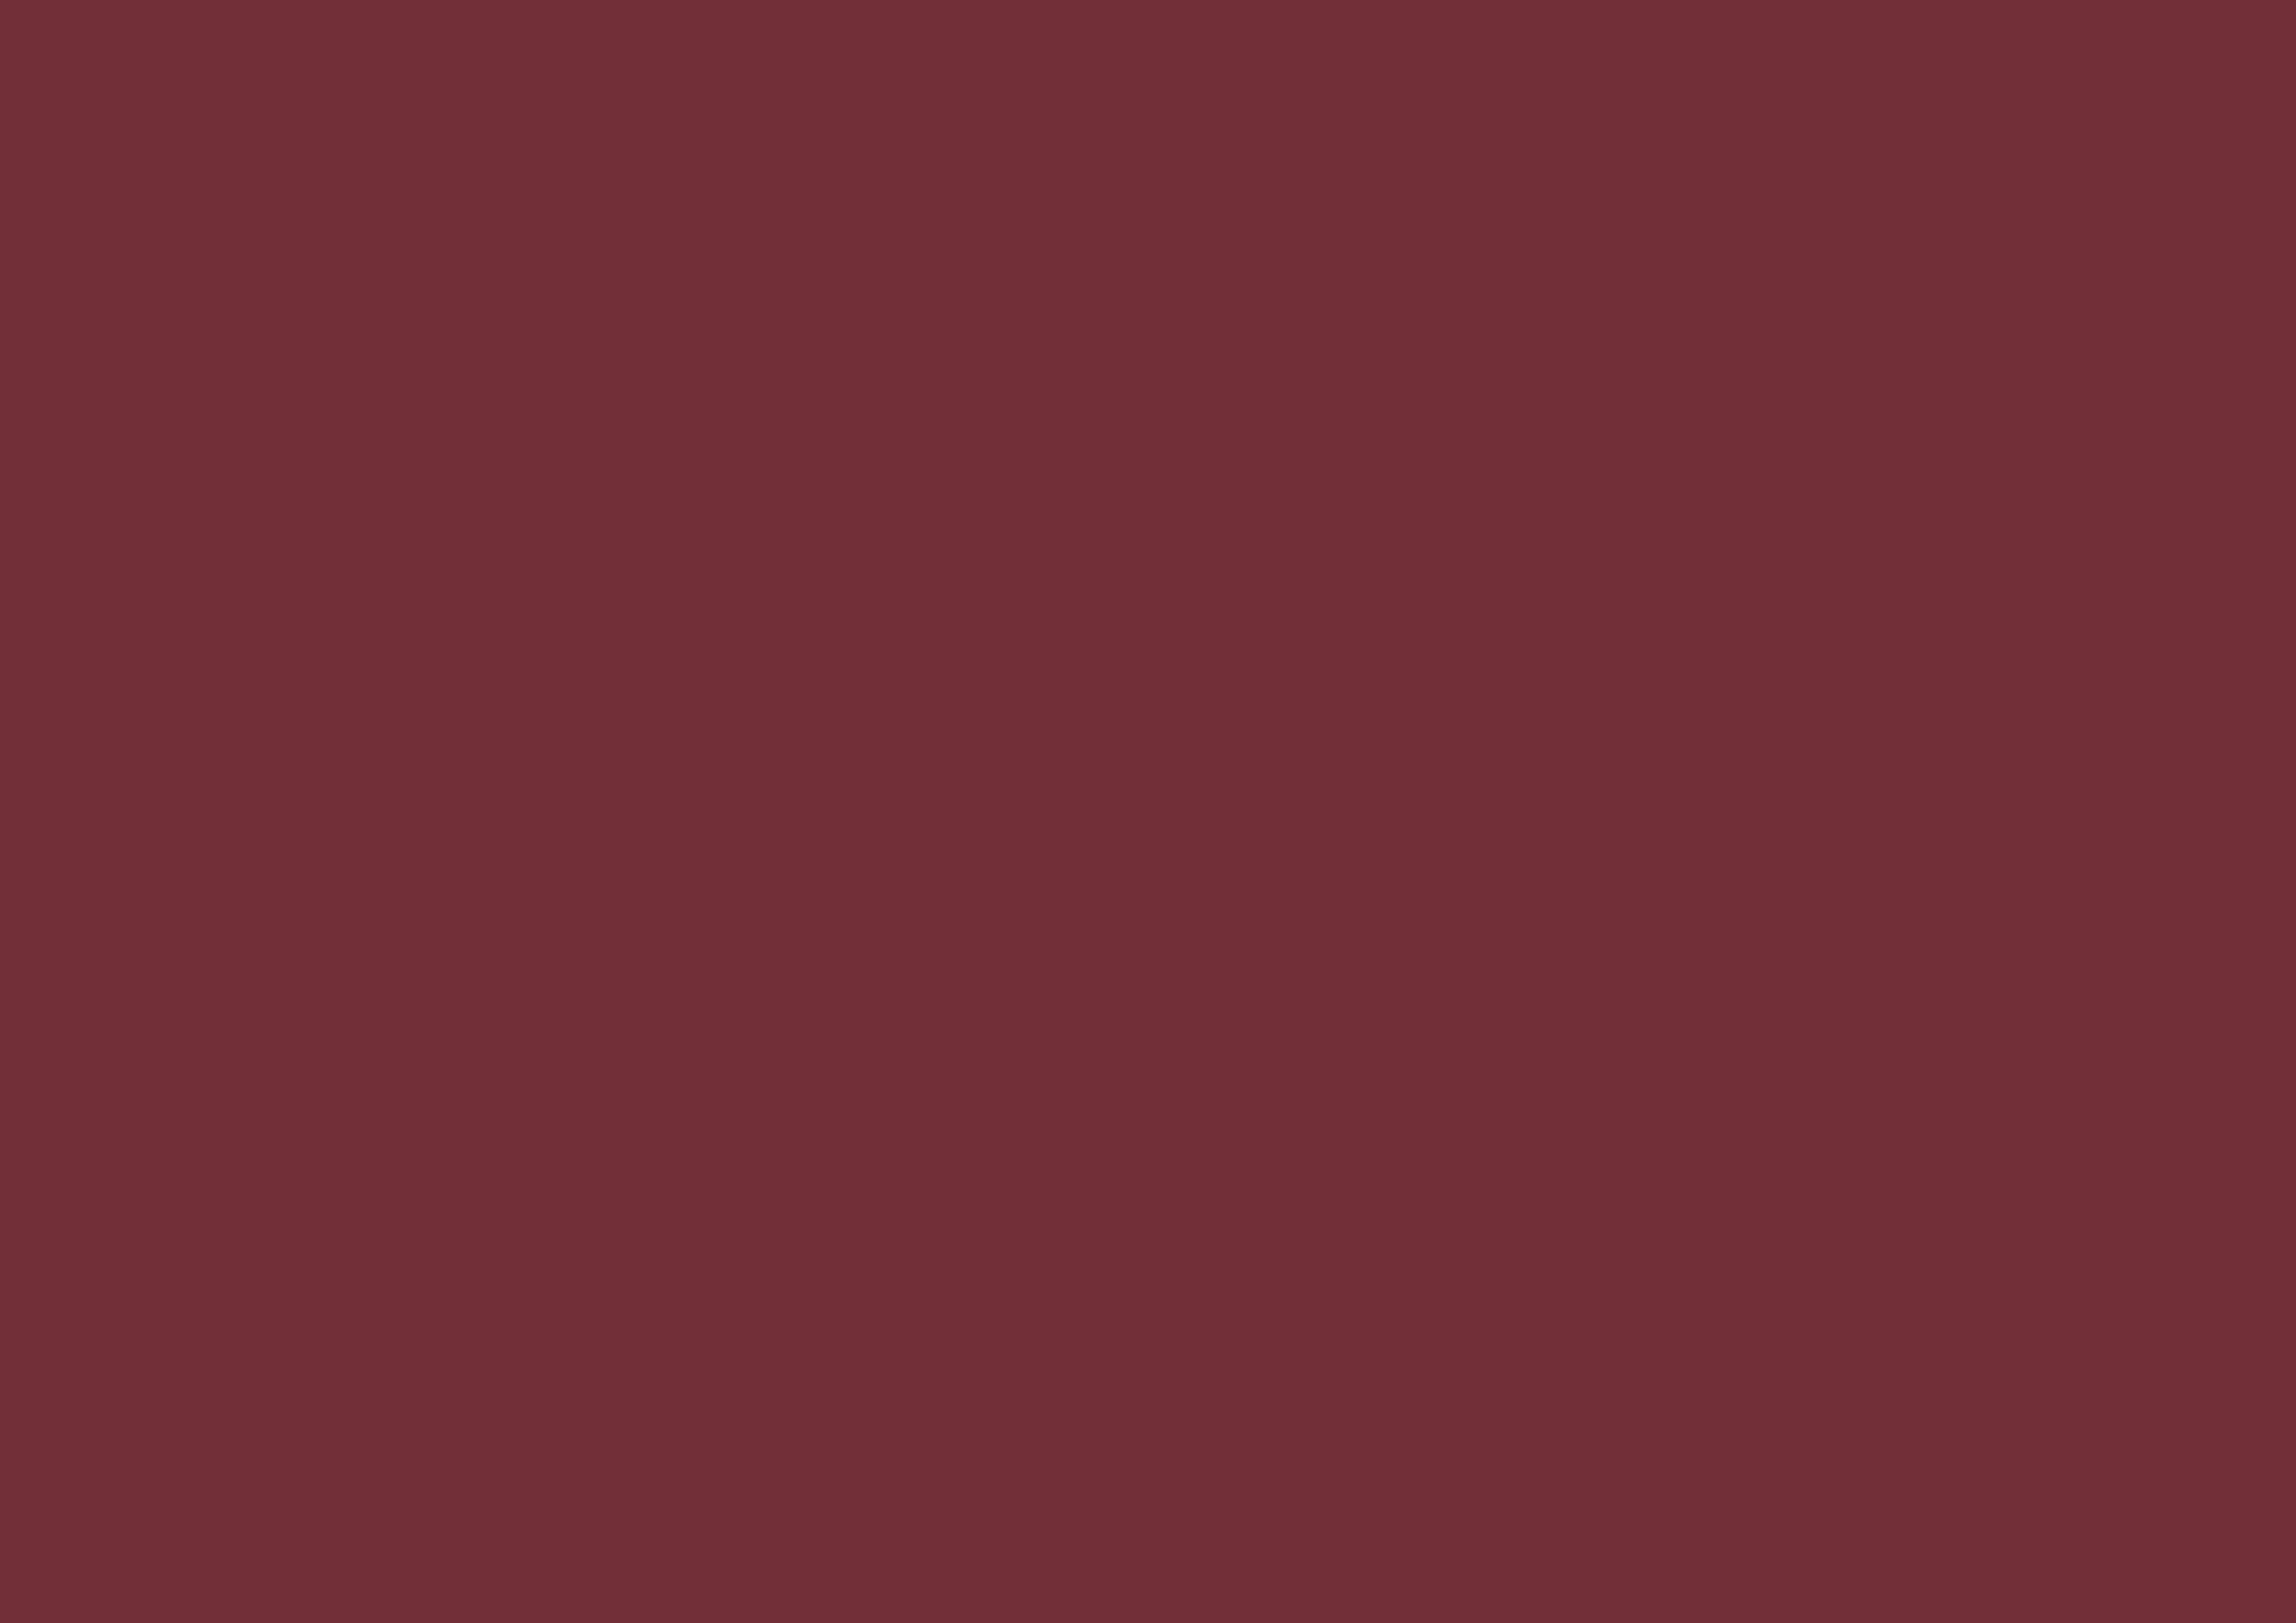 3508x2480 Wine Solid Color Background